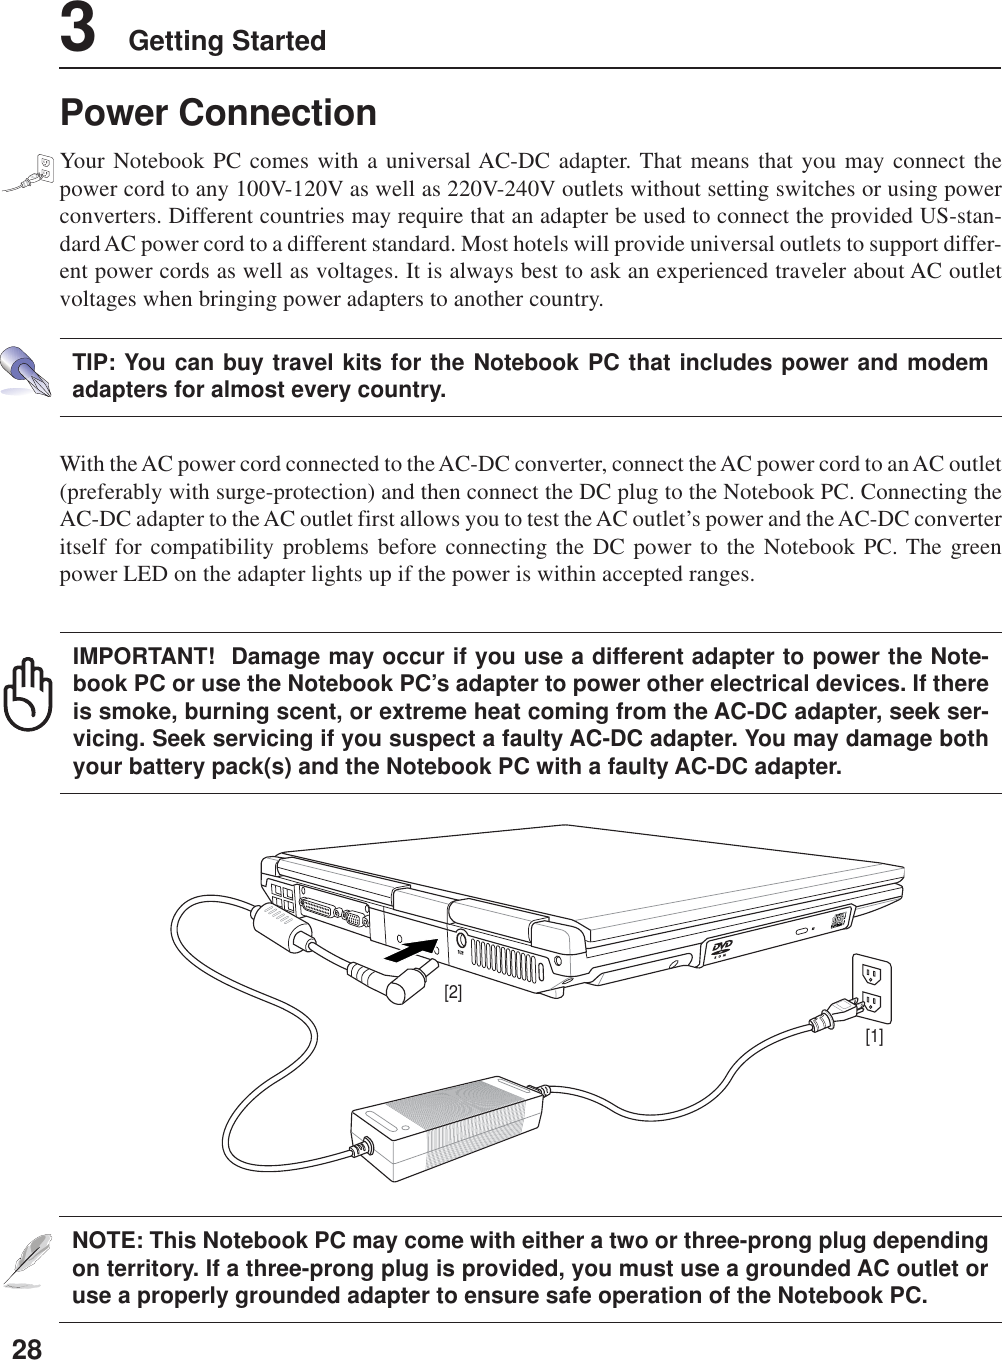 283    Getting StartedNOTE: This Notebook PC may come with either a two or three-prong plug dependingon territory. If a three-prong plug is provided, you must use a grounded AC outlet oruse a properly grounded adapter to ensure safe operation of the Notebook PC.With the AC power cord connected to the AC-DC converter, connect the AC power cord to an AC outlet(preferably with surge-protection) and then connect the DC plug to the Notebook PC. Connecting theAC-DC adapter to the AC outlet first allows you to test the AC outlet’s power and the AC-DC converteritself for compatibility problems before connecting the DC power to the Notebook PC. The greenpower LED on the adapter lights up if the power is within accepted ranges.TIP: You can buy travel kits for the Notebook PC that includes power and modemadapters for almost every country.IMPORTANT!  Damage may occur if you use a different adapter to power the Note-book PC or use the Notebook PC’s adapter to power other electrical devices. If thereis smoke, burning scent, or extreme heat coming from the AC-DC adapter, seek ser-vicing. Seek servicing if you suspect a faulty AC-DC adapter. You may damage bothyour battery pack(s) and the Notebook PC with a faulty AC-DC adapter.[1][2]Power ConnectionYour Notebook PC comes with a universal AC-DC adapter. That means that you may connect thepower cord to any 100V-120V as well as 220V-240V outlets without setting switches or using powerconverters. Different countries may require that an adapter be used to connect the provided US-stan-dard AC power cord to a different standard. Most hotels will provide universal outlets to support differ-ent power cords as well as voltages. It is always best to ask an experienced traveler about AC outletvoltages when bringing power adapters to another country.